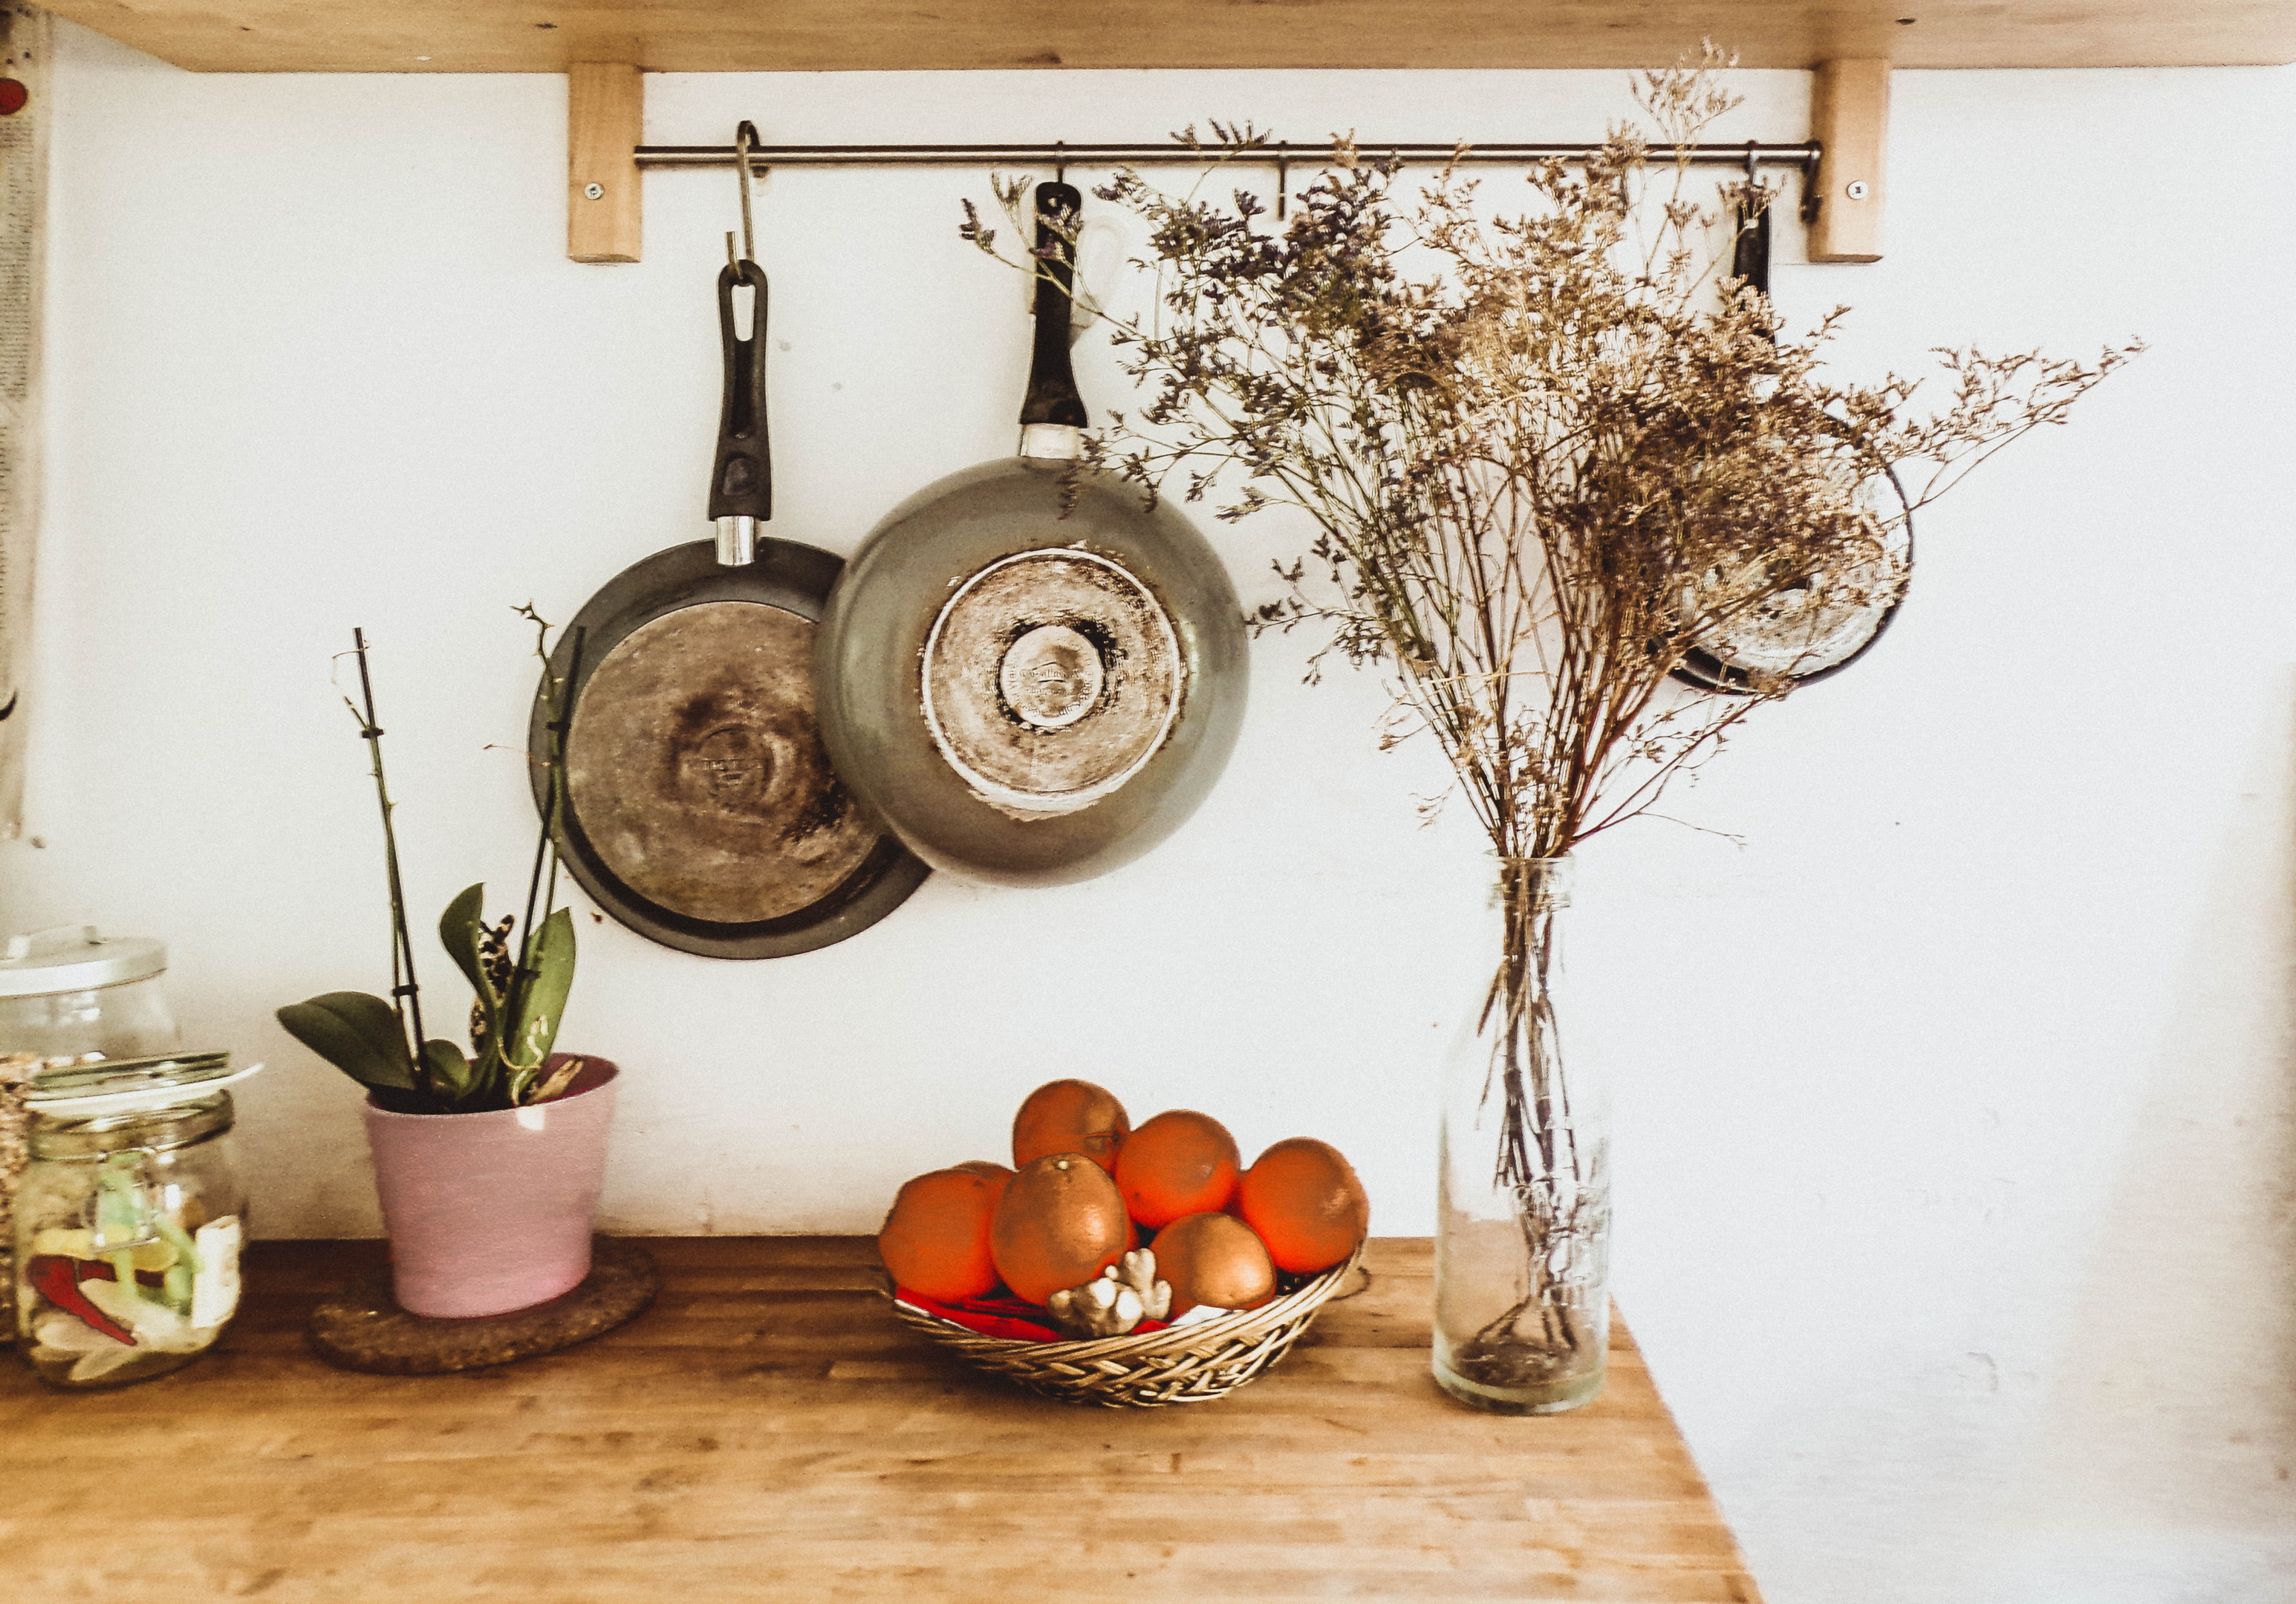 Kitchen space with wall-mounted pot rack